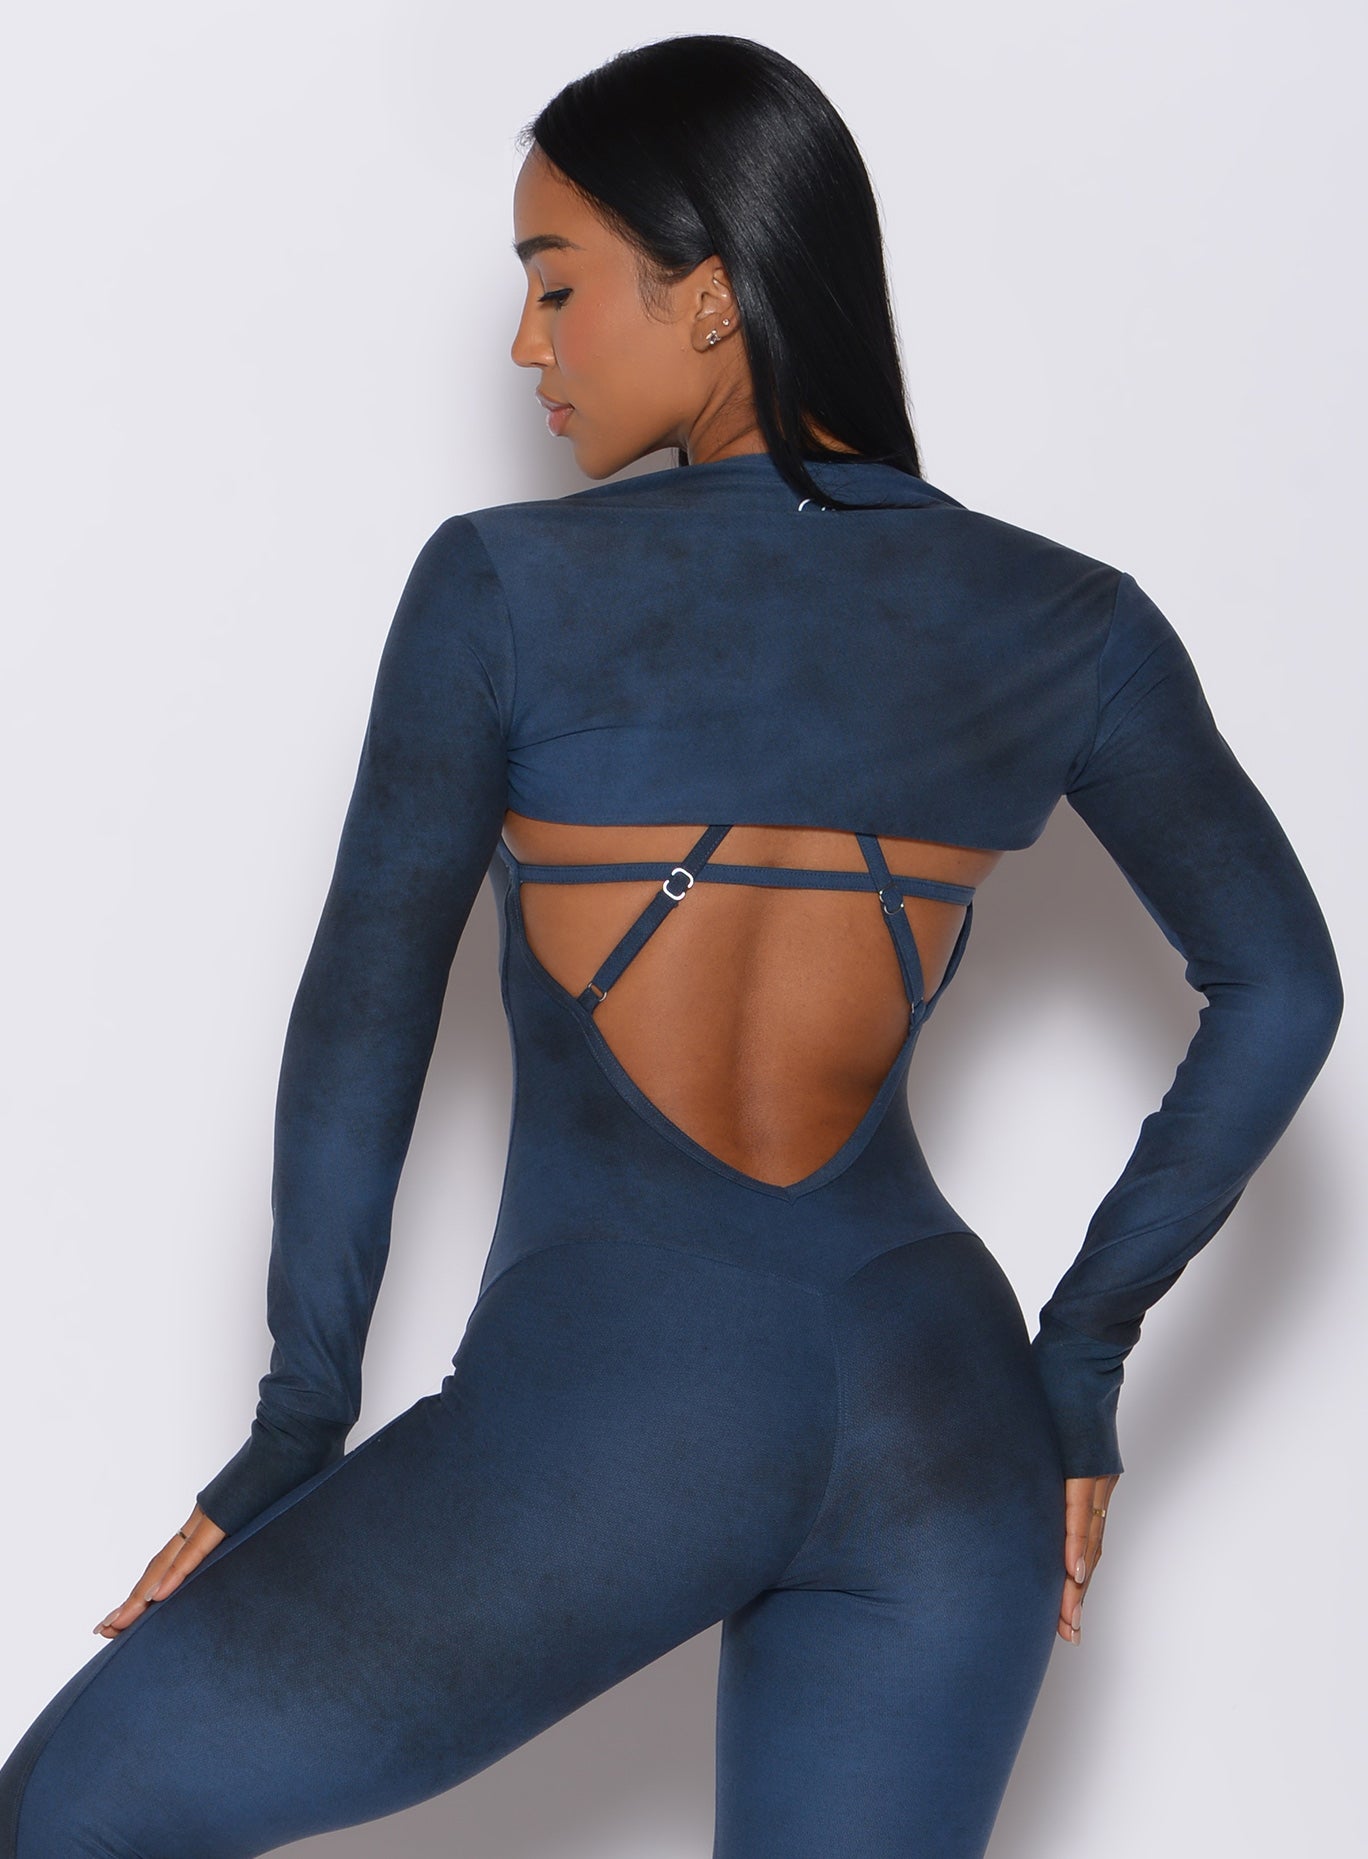 Back profile view of a model facing to her left wearing our shape shrug in vintage blue color along with the matching bodysuit